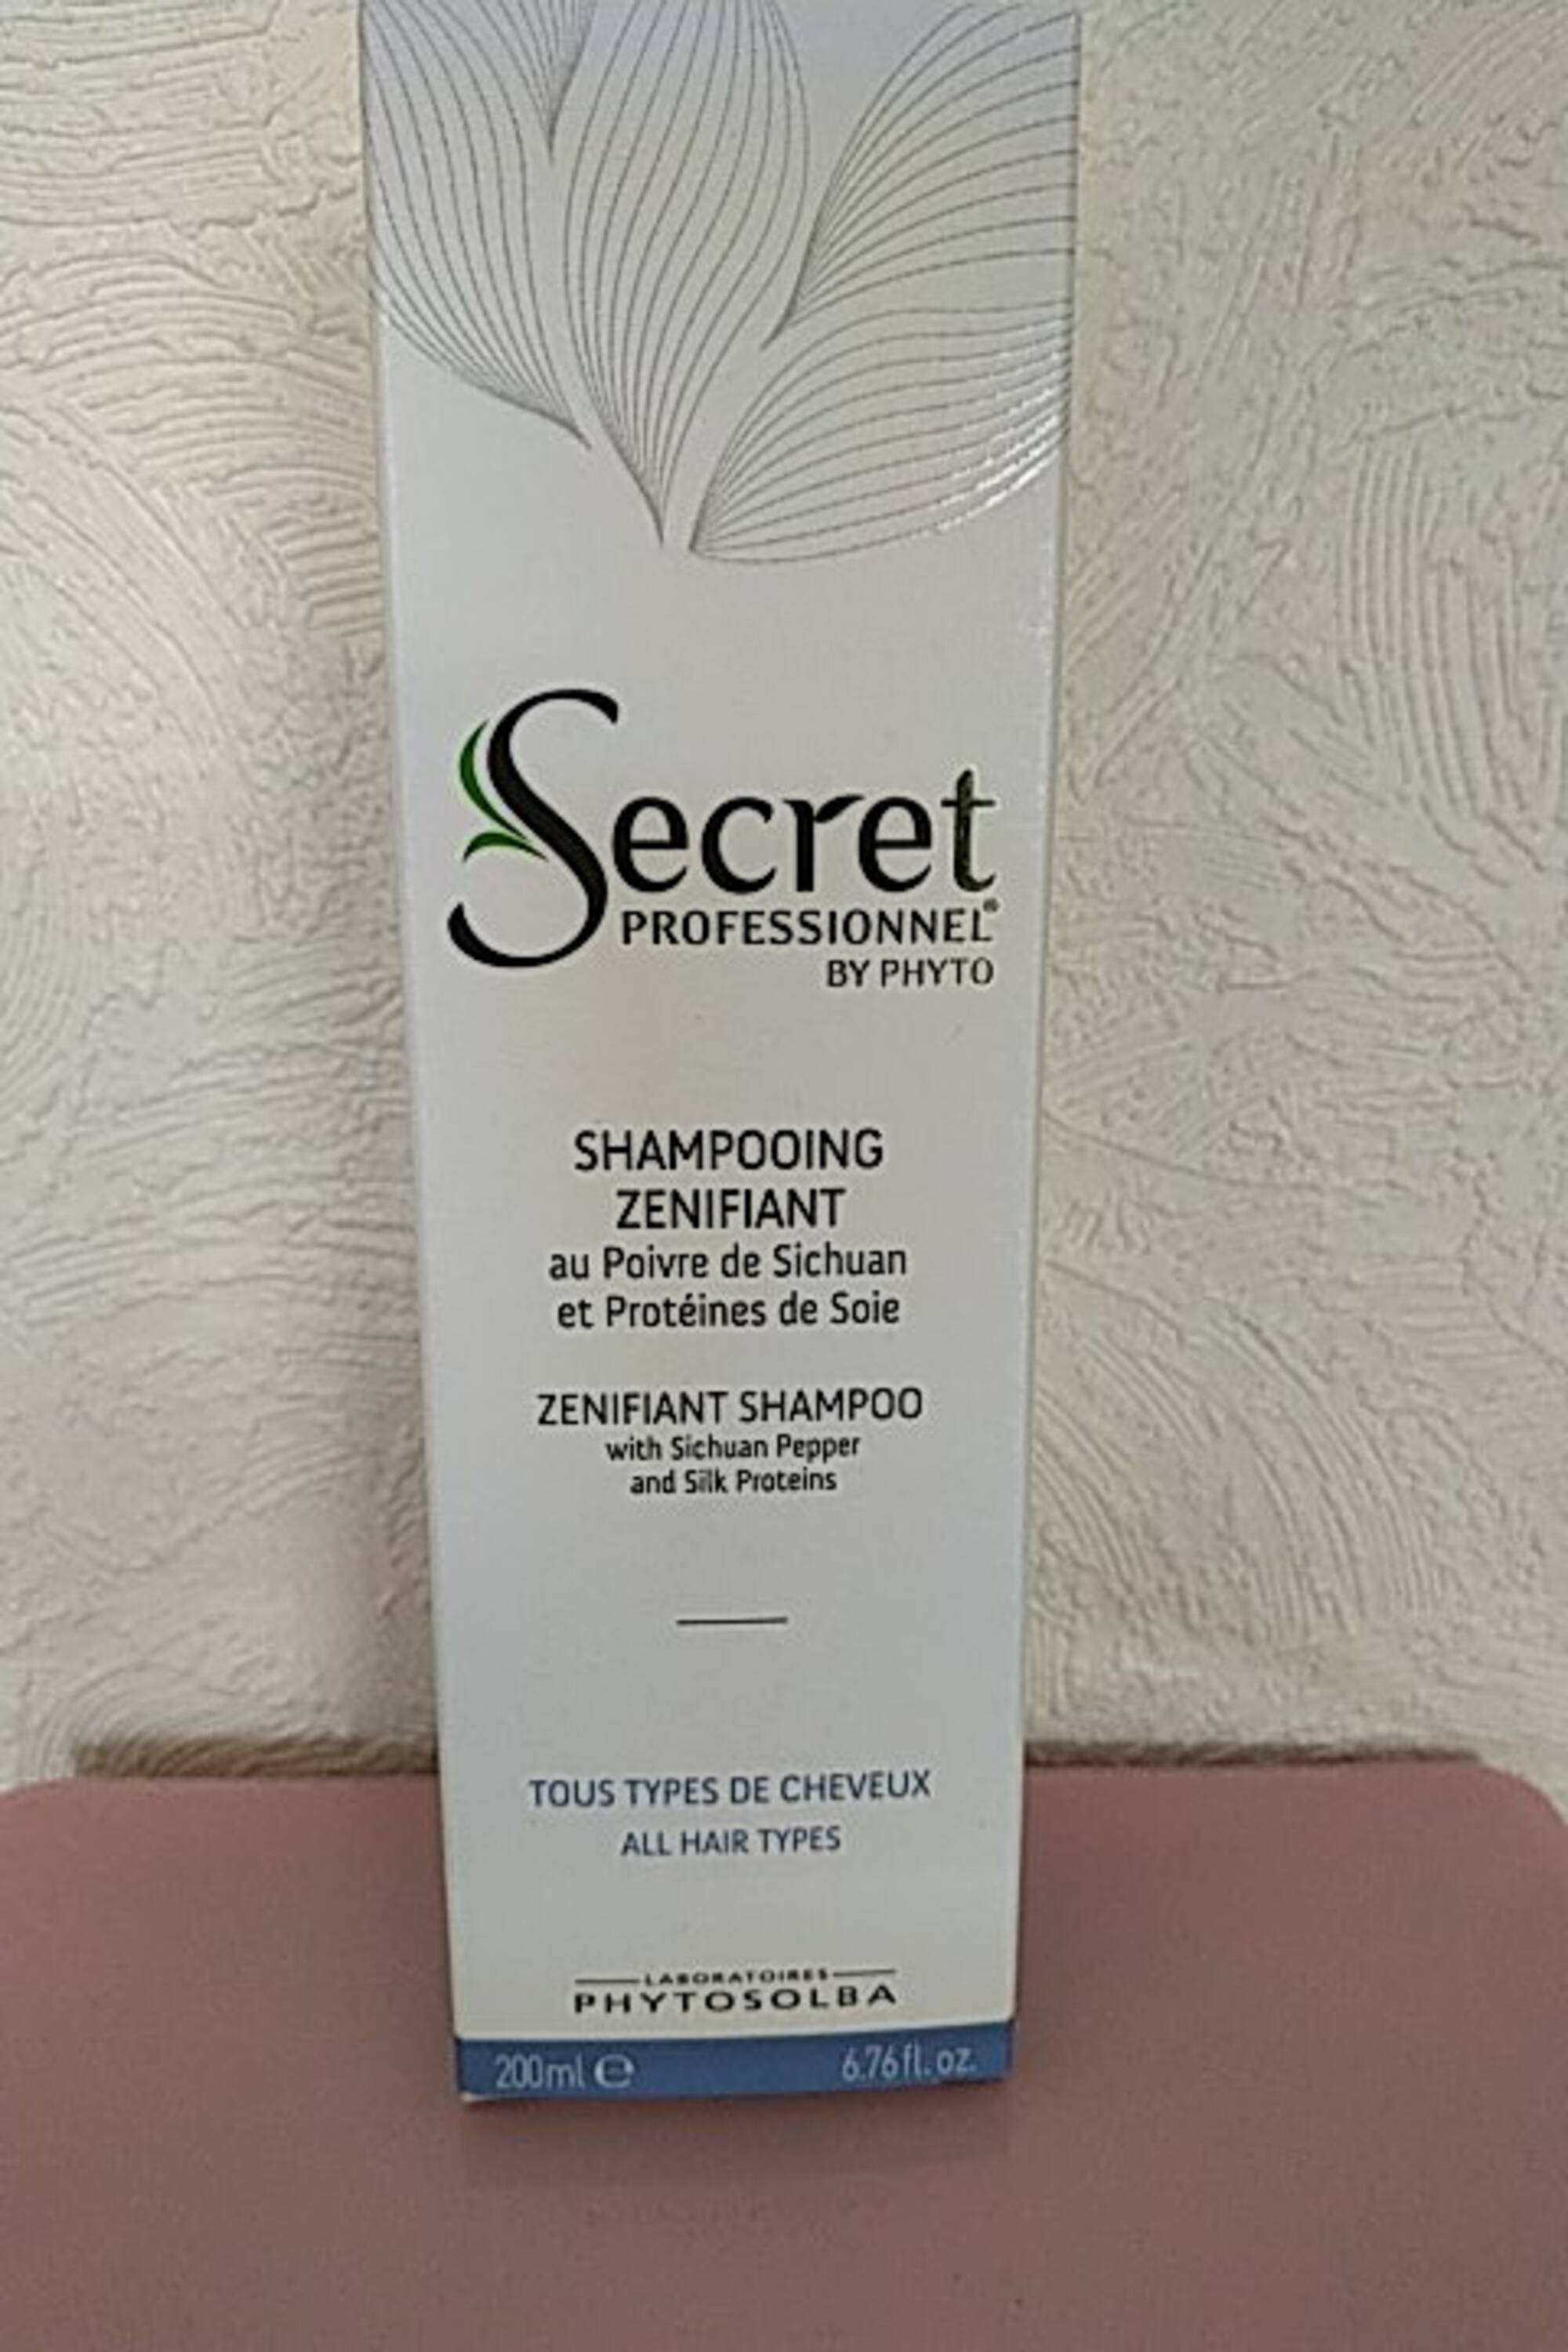 SECRET PROFESSIONNEL BY PHYTO - Shampooing zenifiant